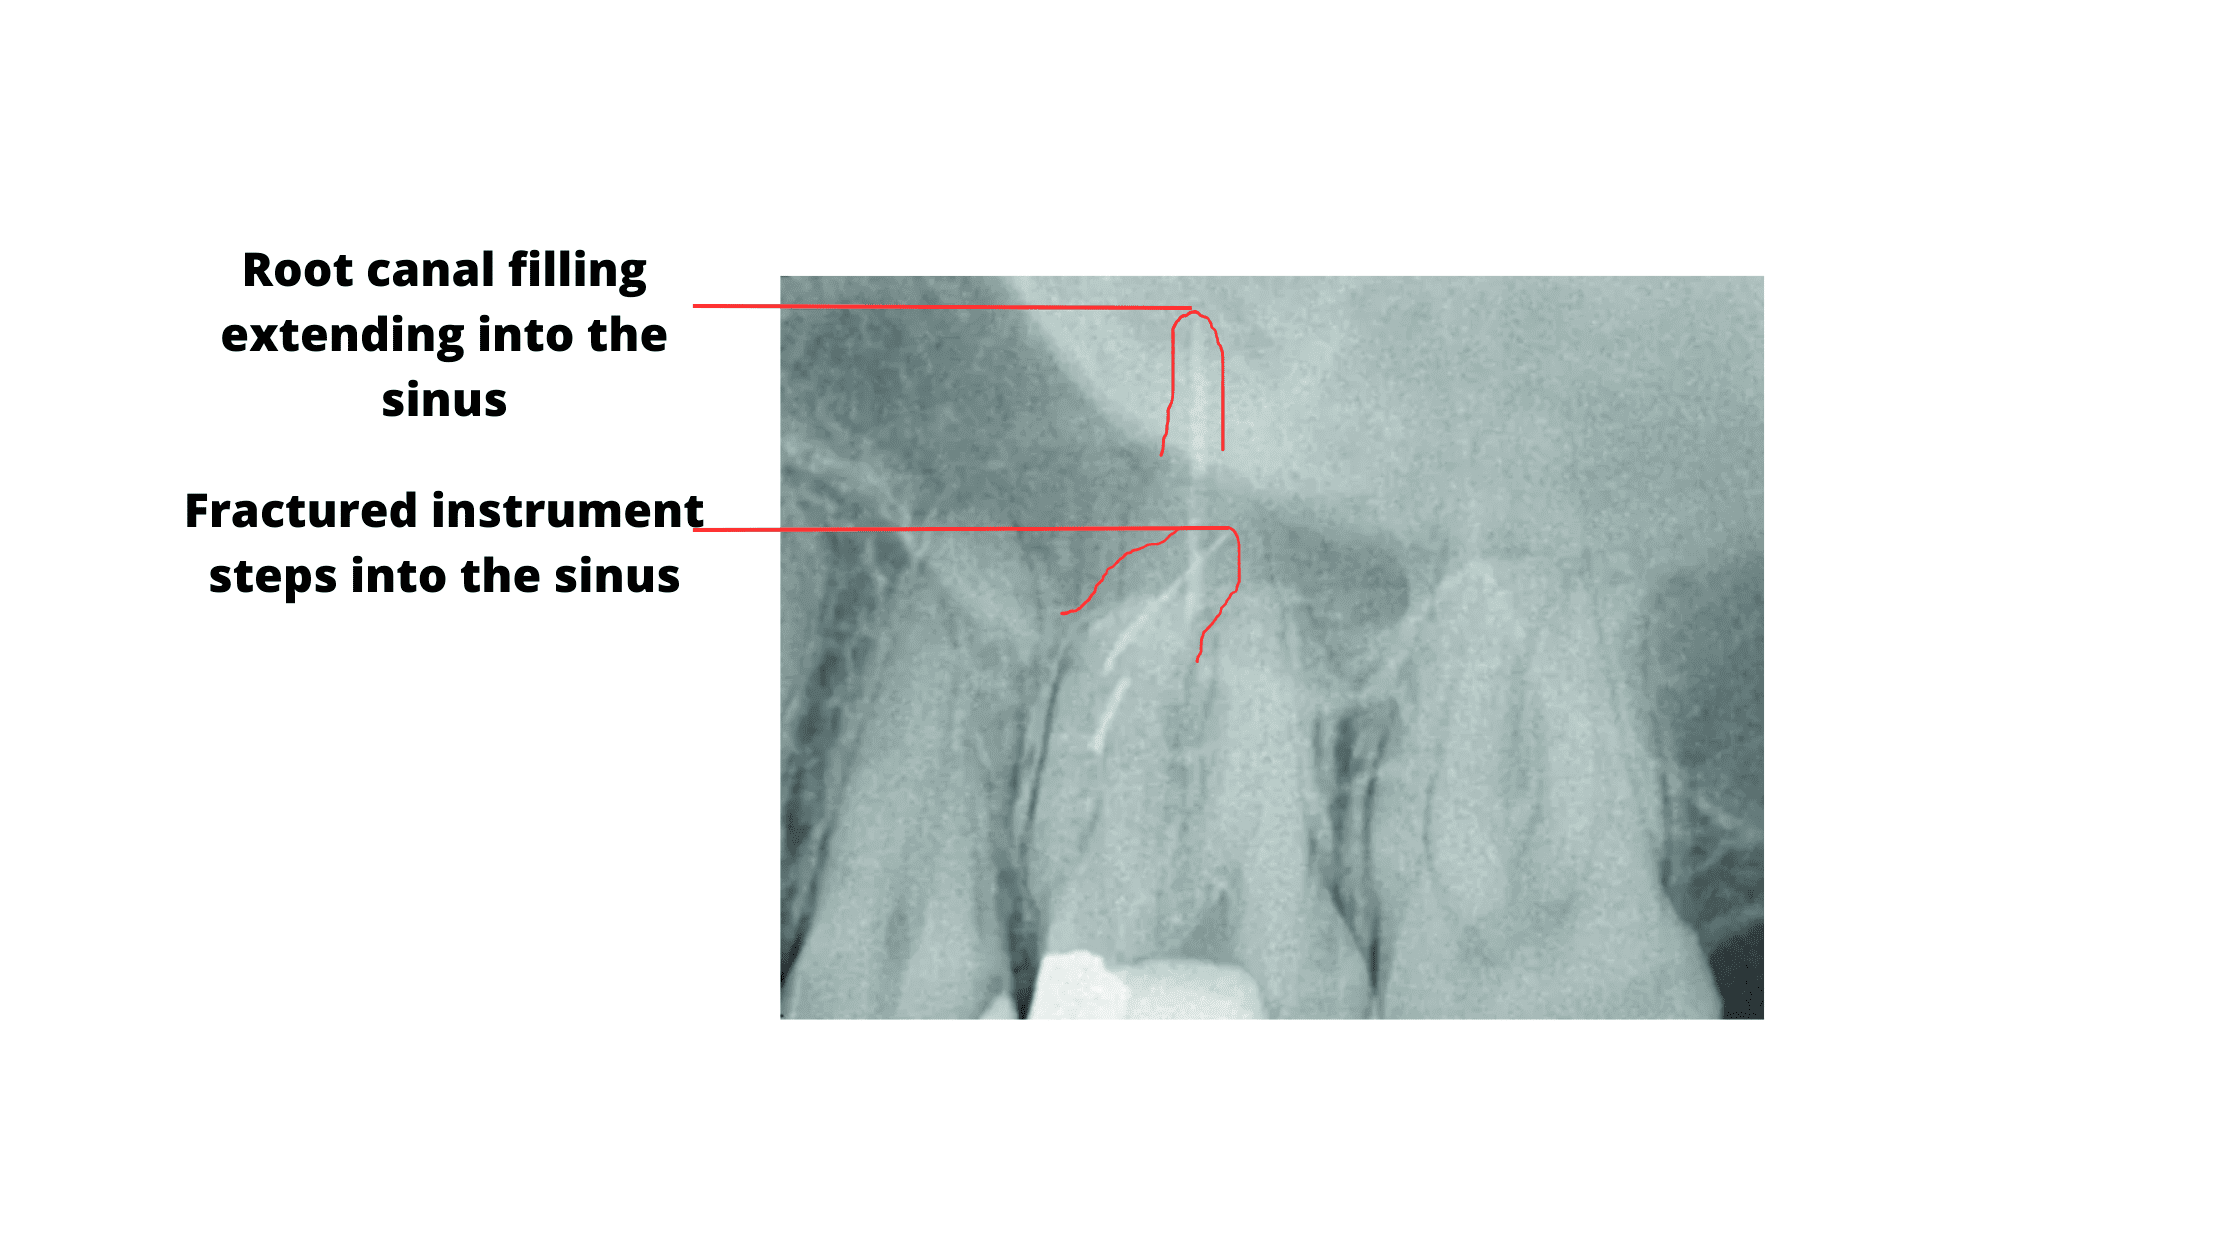 X-ray showing an instrument fracture on the root canal of an upper molar